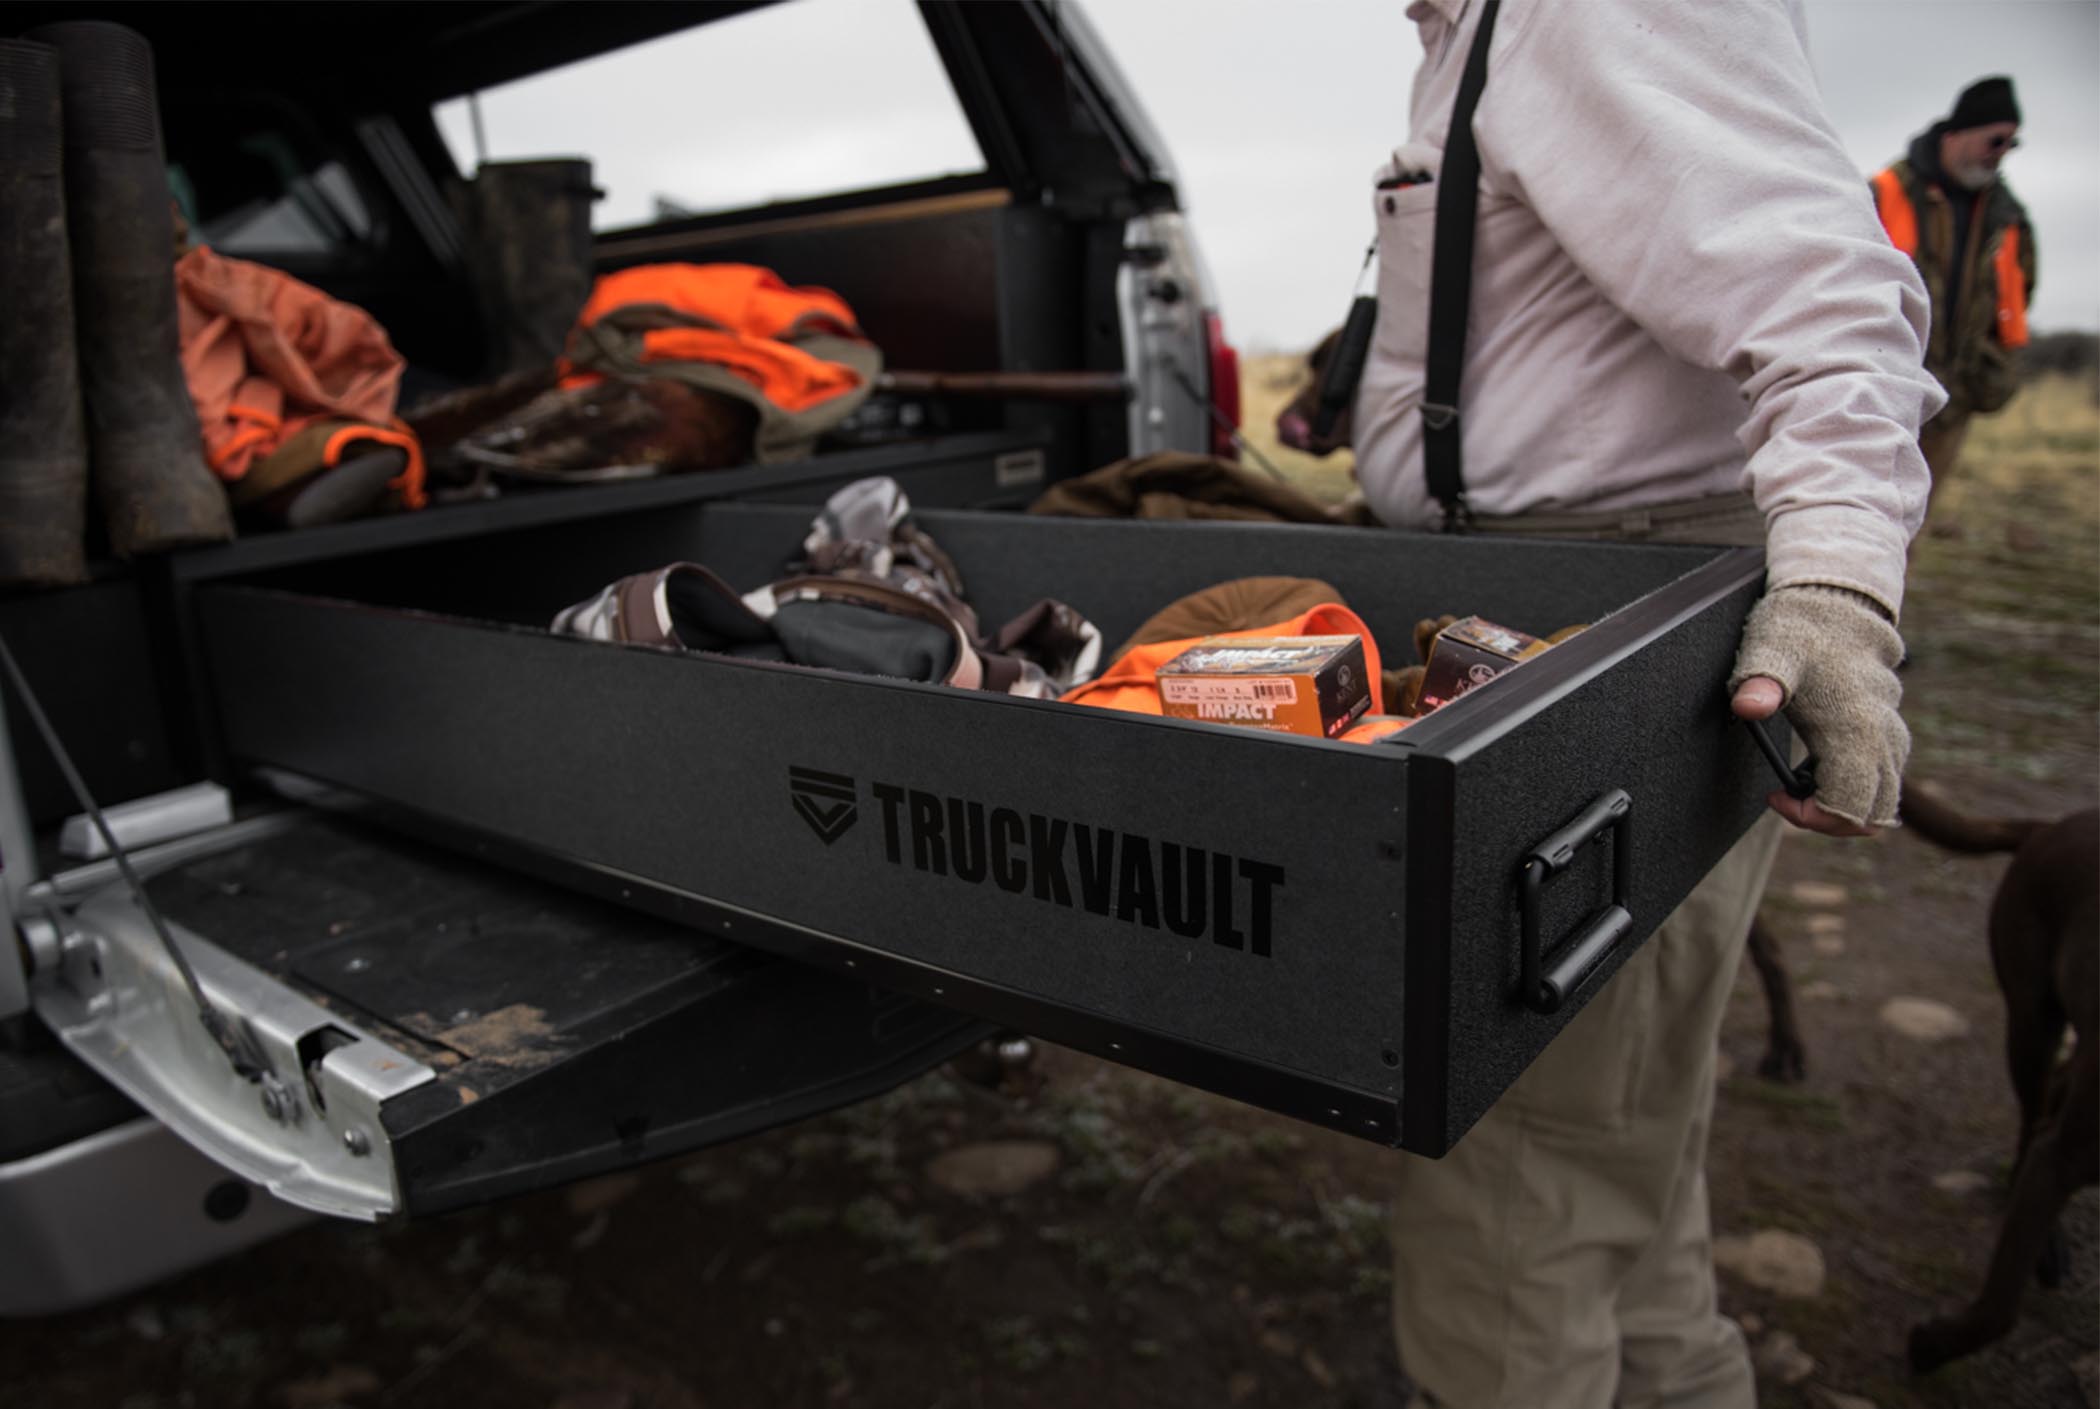 A man opening a covered bed TruckVault system that is securing upland bird hunting equipment.